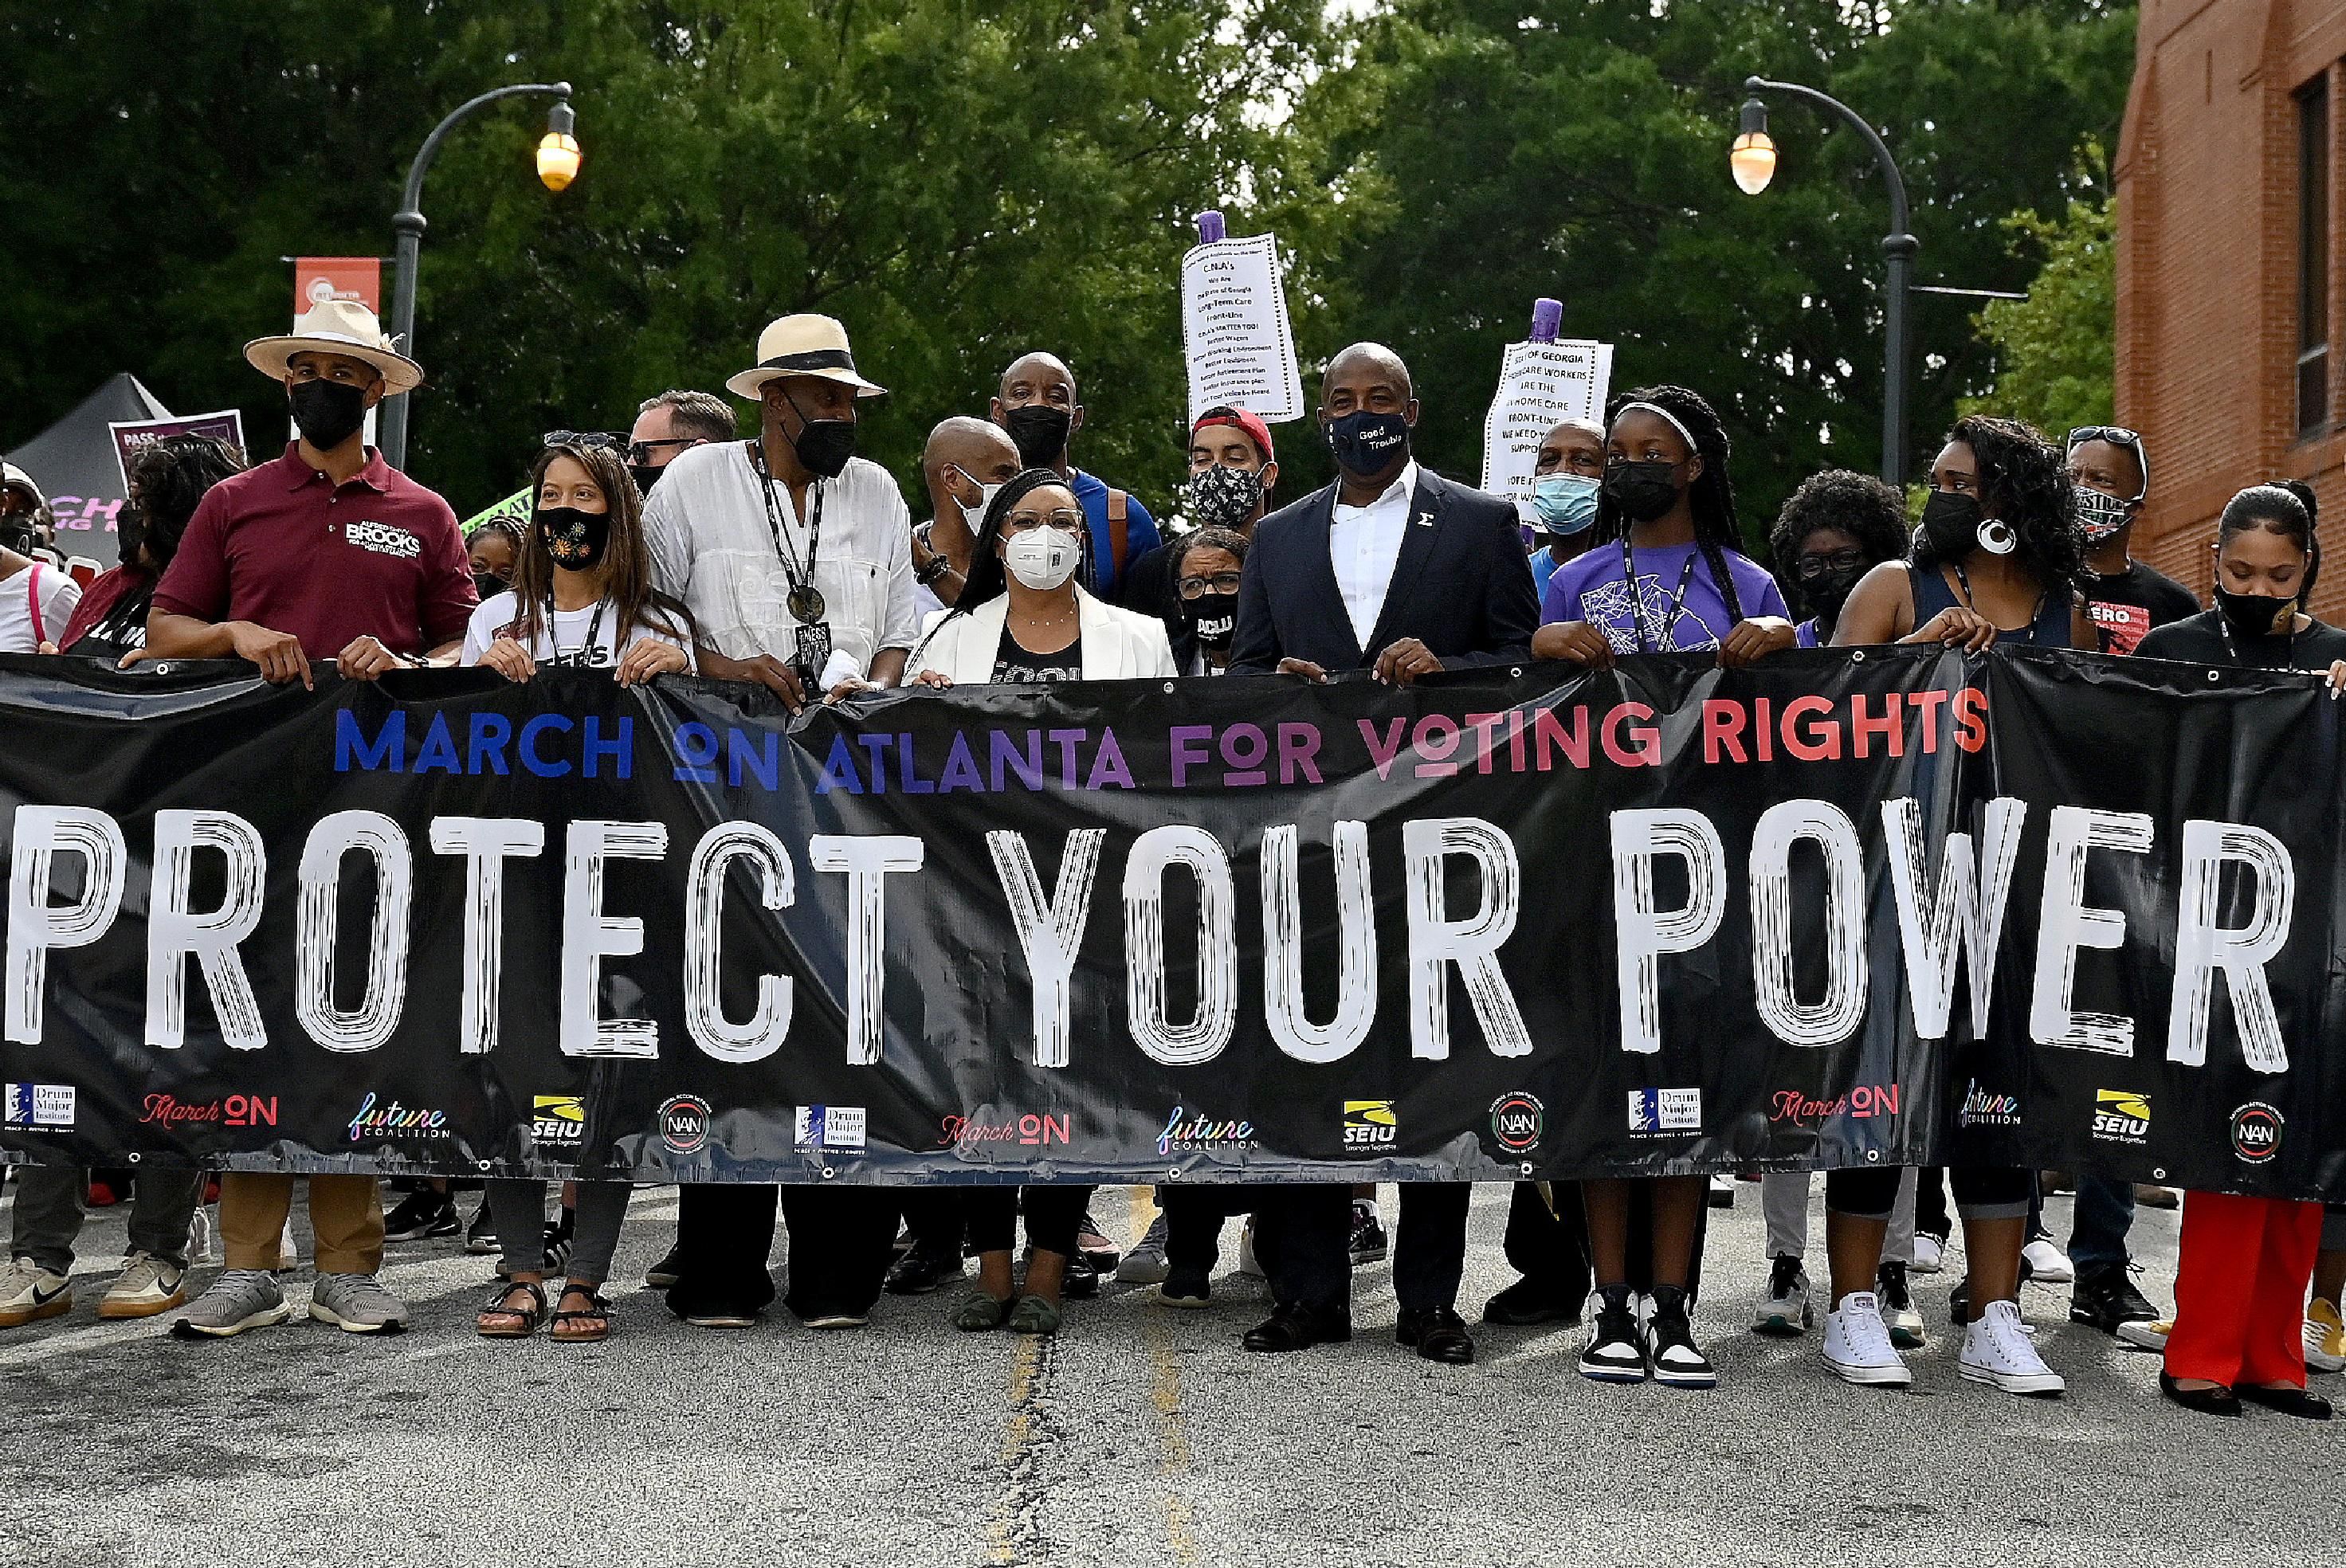 Activists march for voting rights in Georgia